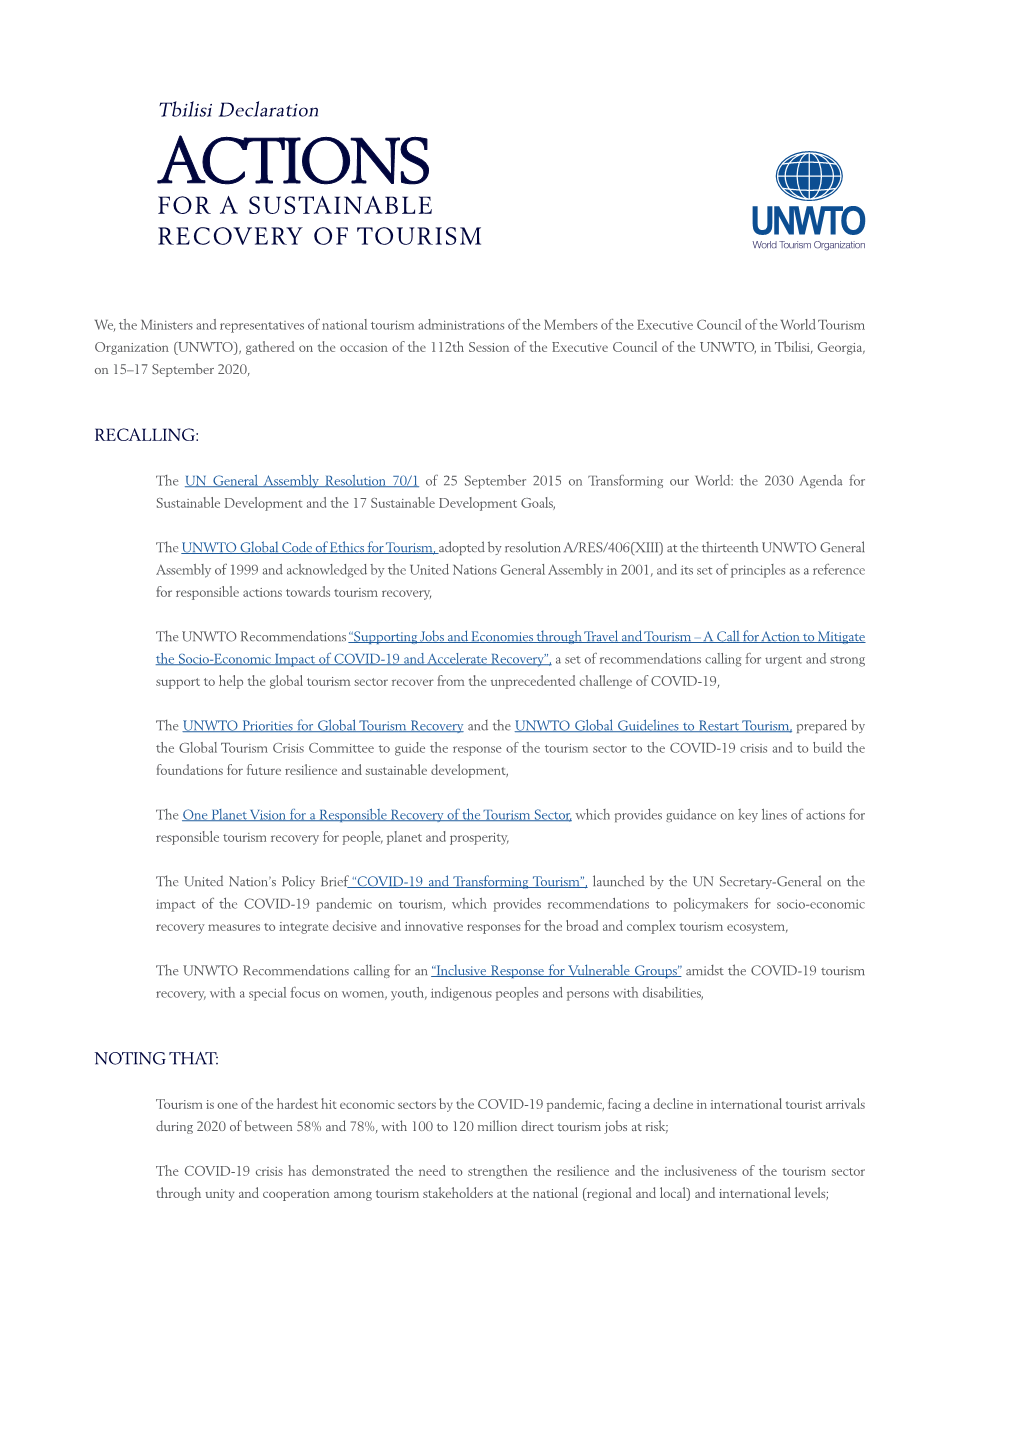 Tbilisi Declaration: Actions for Sustainable Recovery